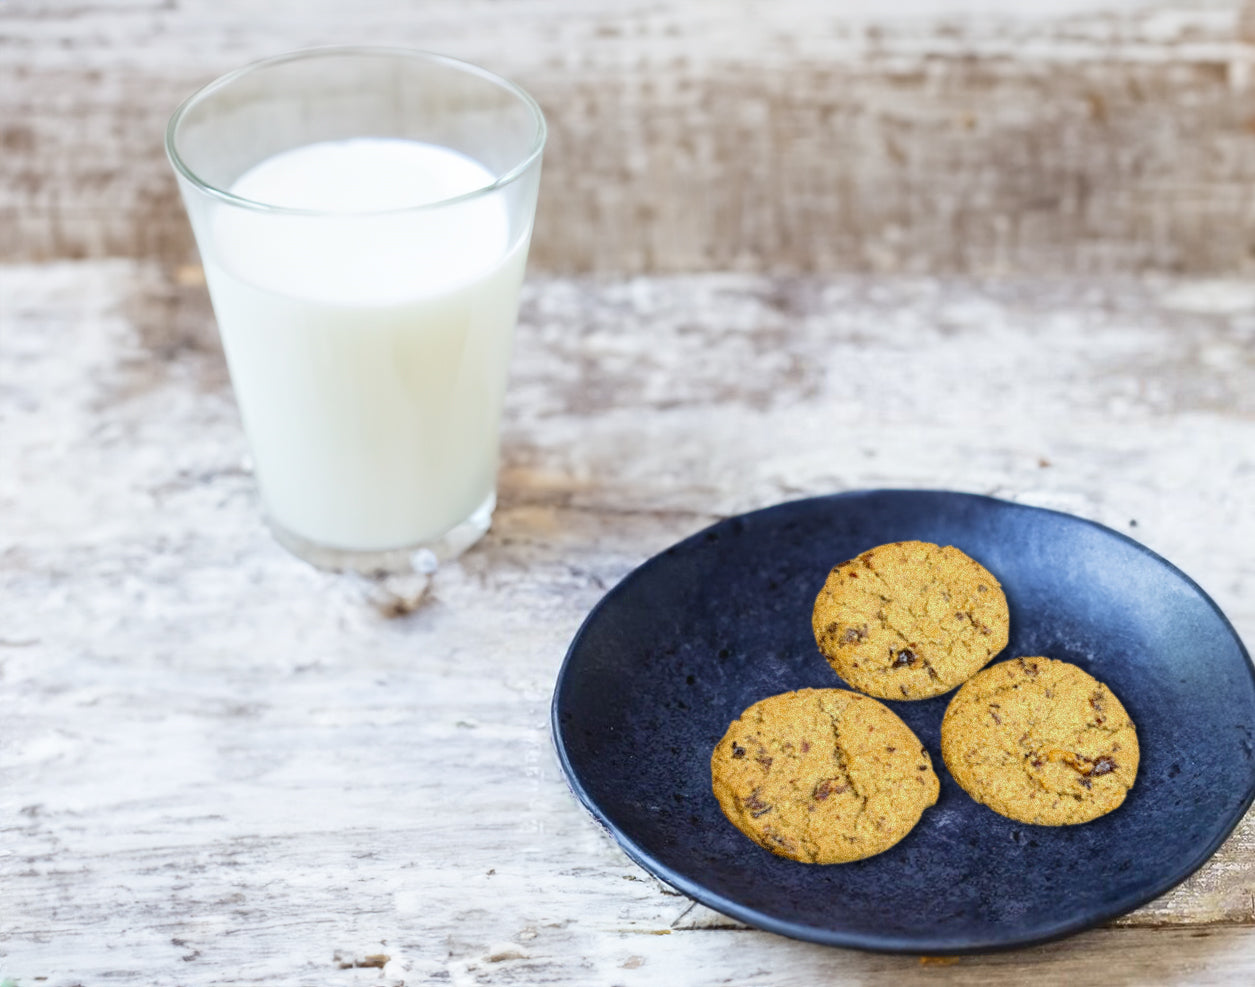 Nightfood sleep-friendly cookies, Date Night Cherry Oat flavor, on a pate with a glass of milk